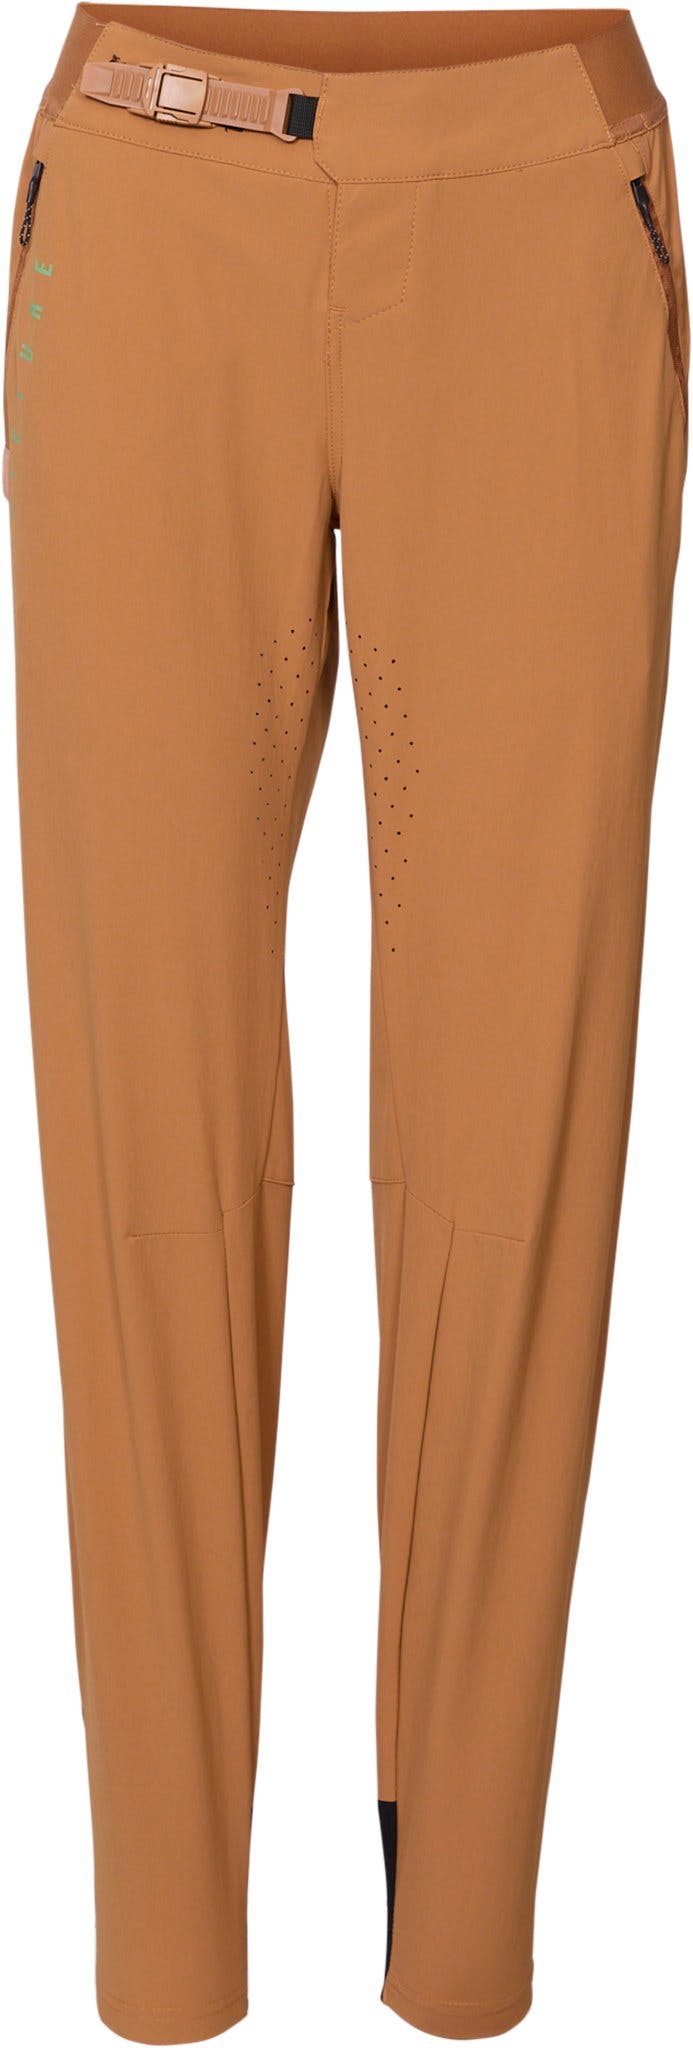 Product image for Velan Stretch Pants - Women's